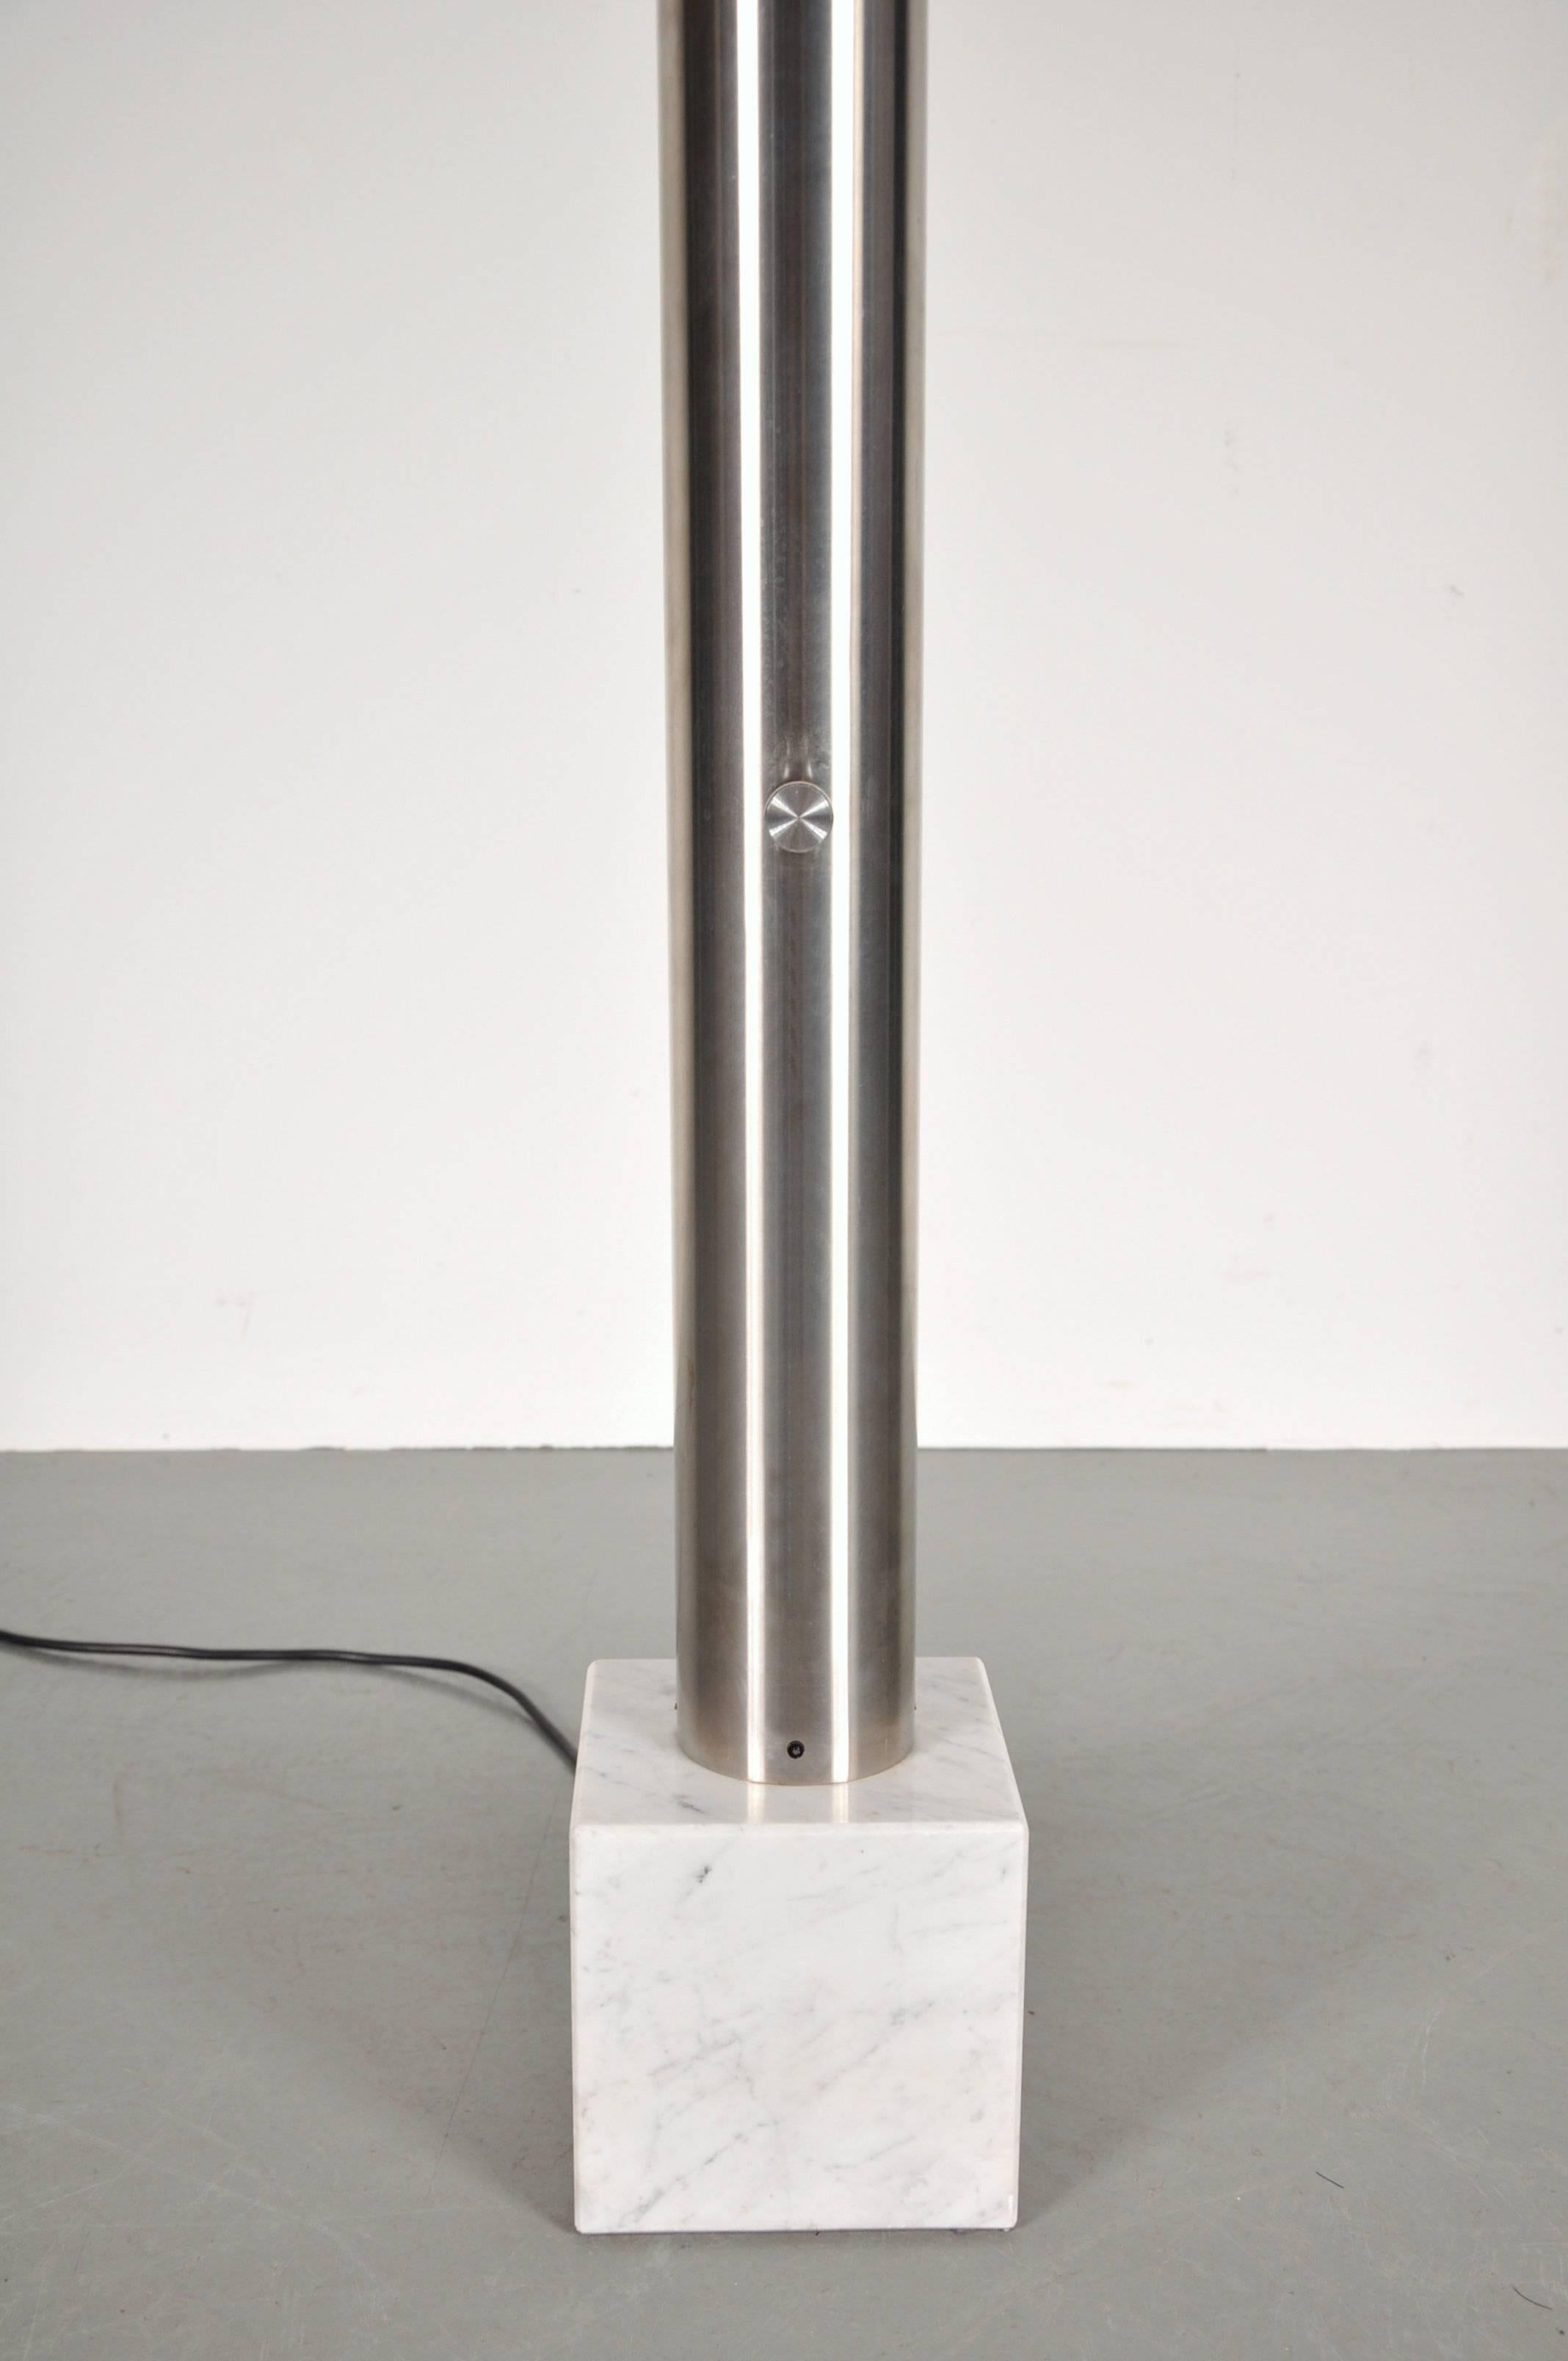 Stunning Italian floor lamp manufactured, circa 1960.

This unique piece is made of high quality aluminium on a beautiful marble base, ginving it a luxury appearance. Emitting light from the top, the lamp is a true eye-catcher that would make a